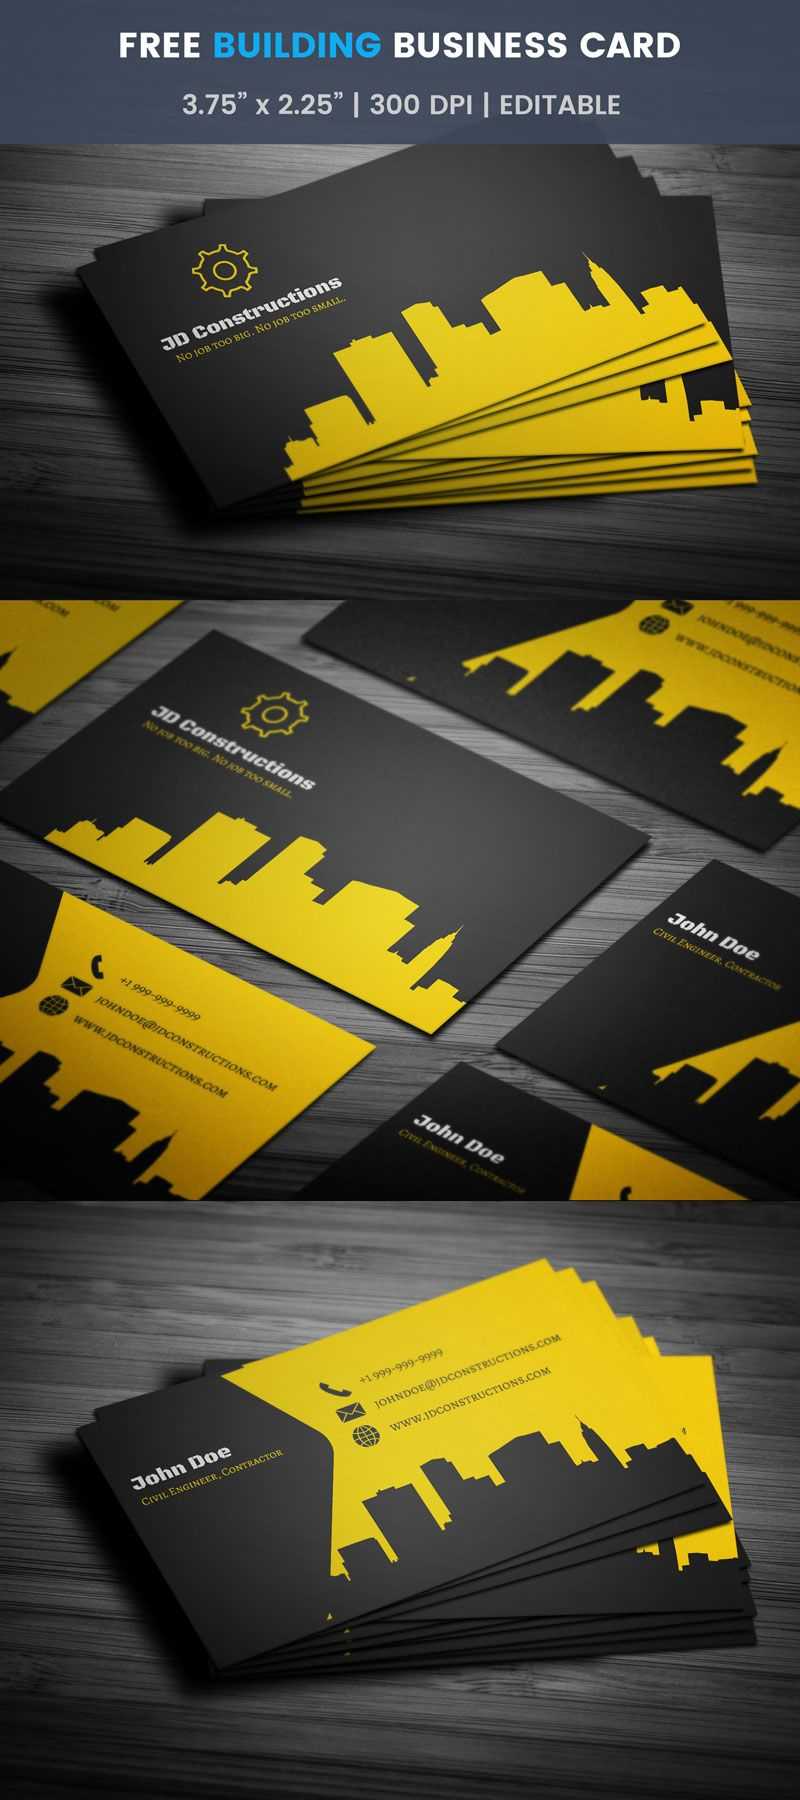 Free Construction Business Card Template Word Visiting Regarding Construction Business Card Templates Download Free